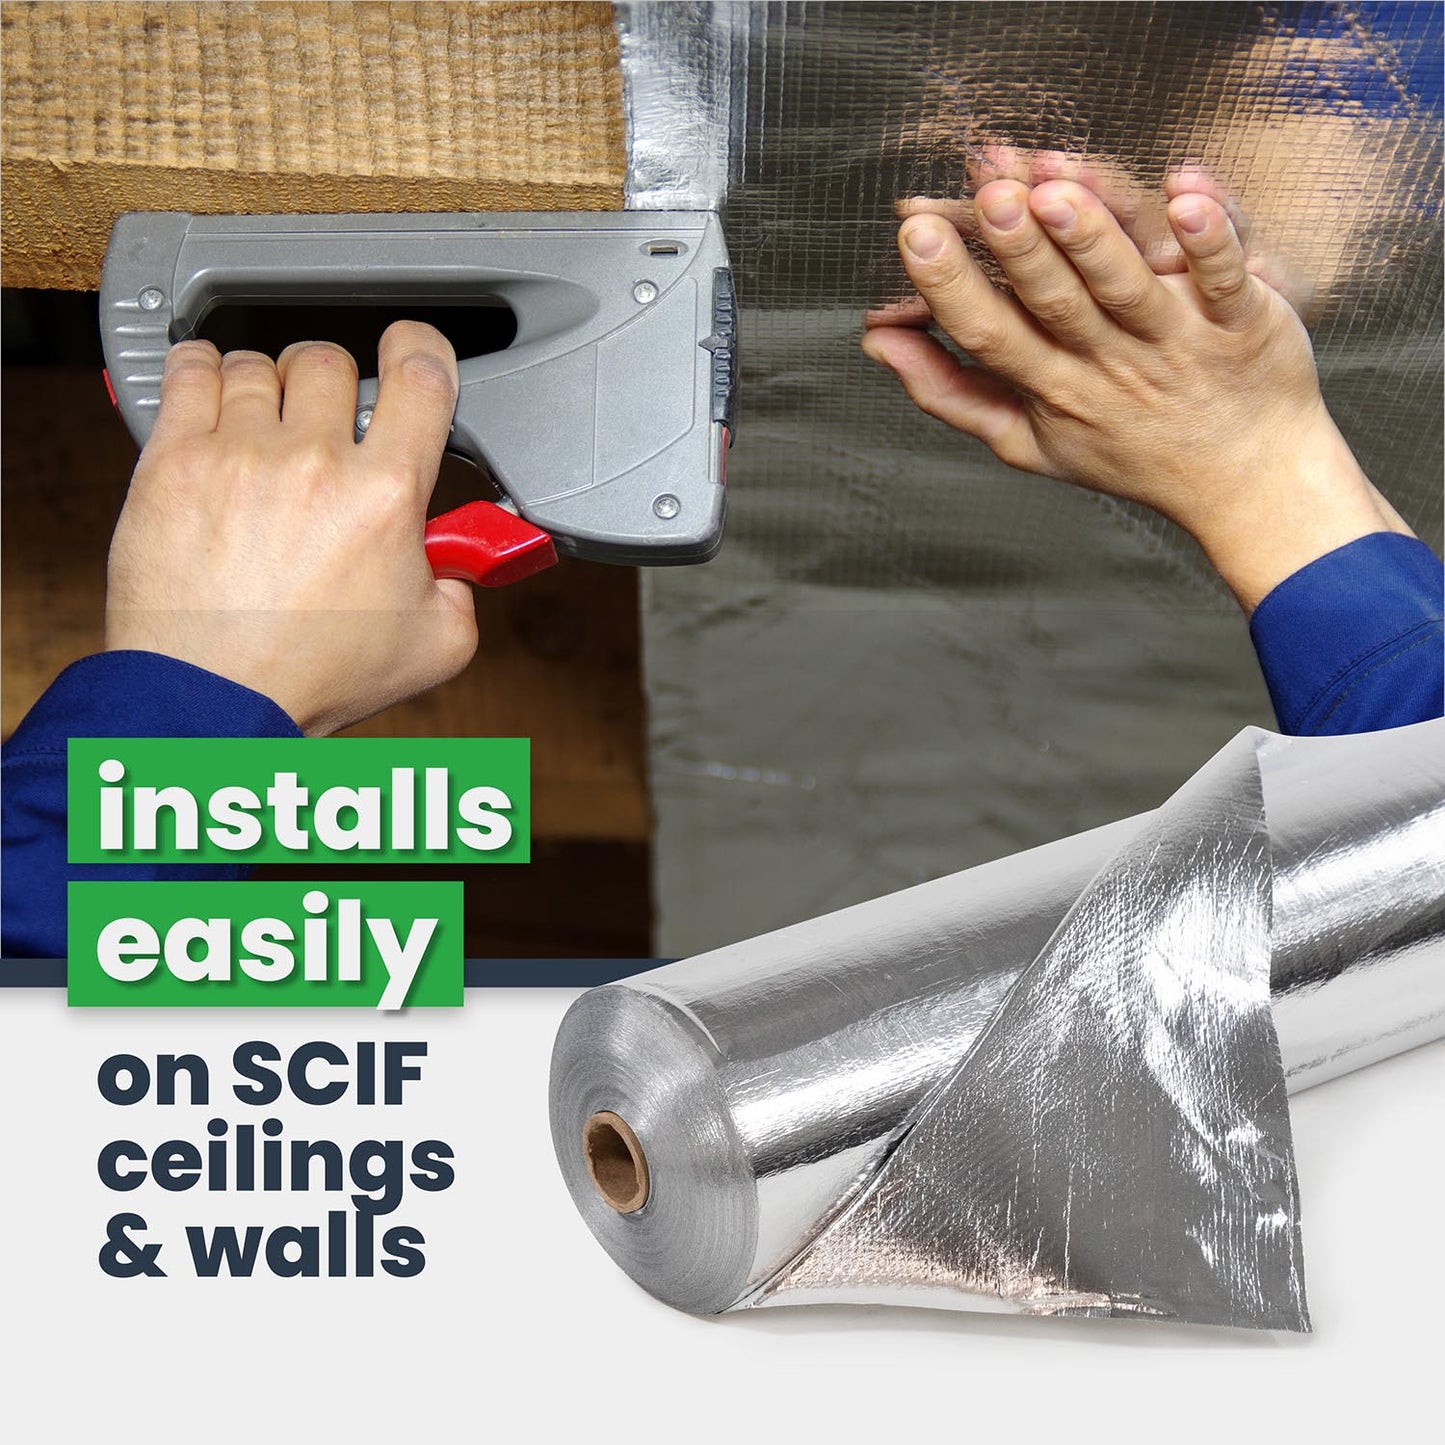 SCIF material installs easily on SCIF walls and ceilings